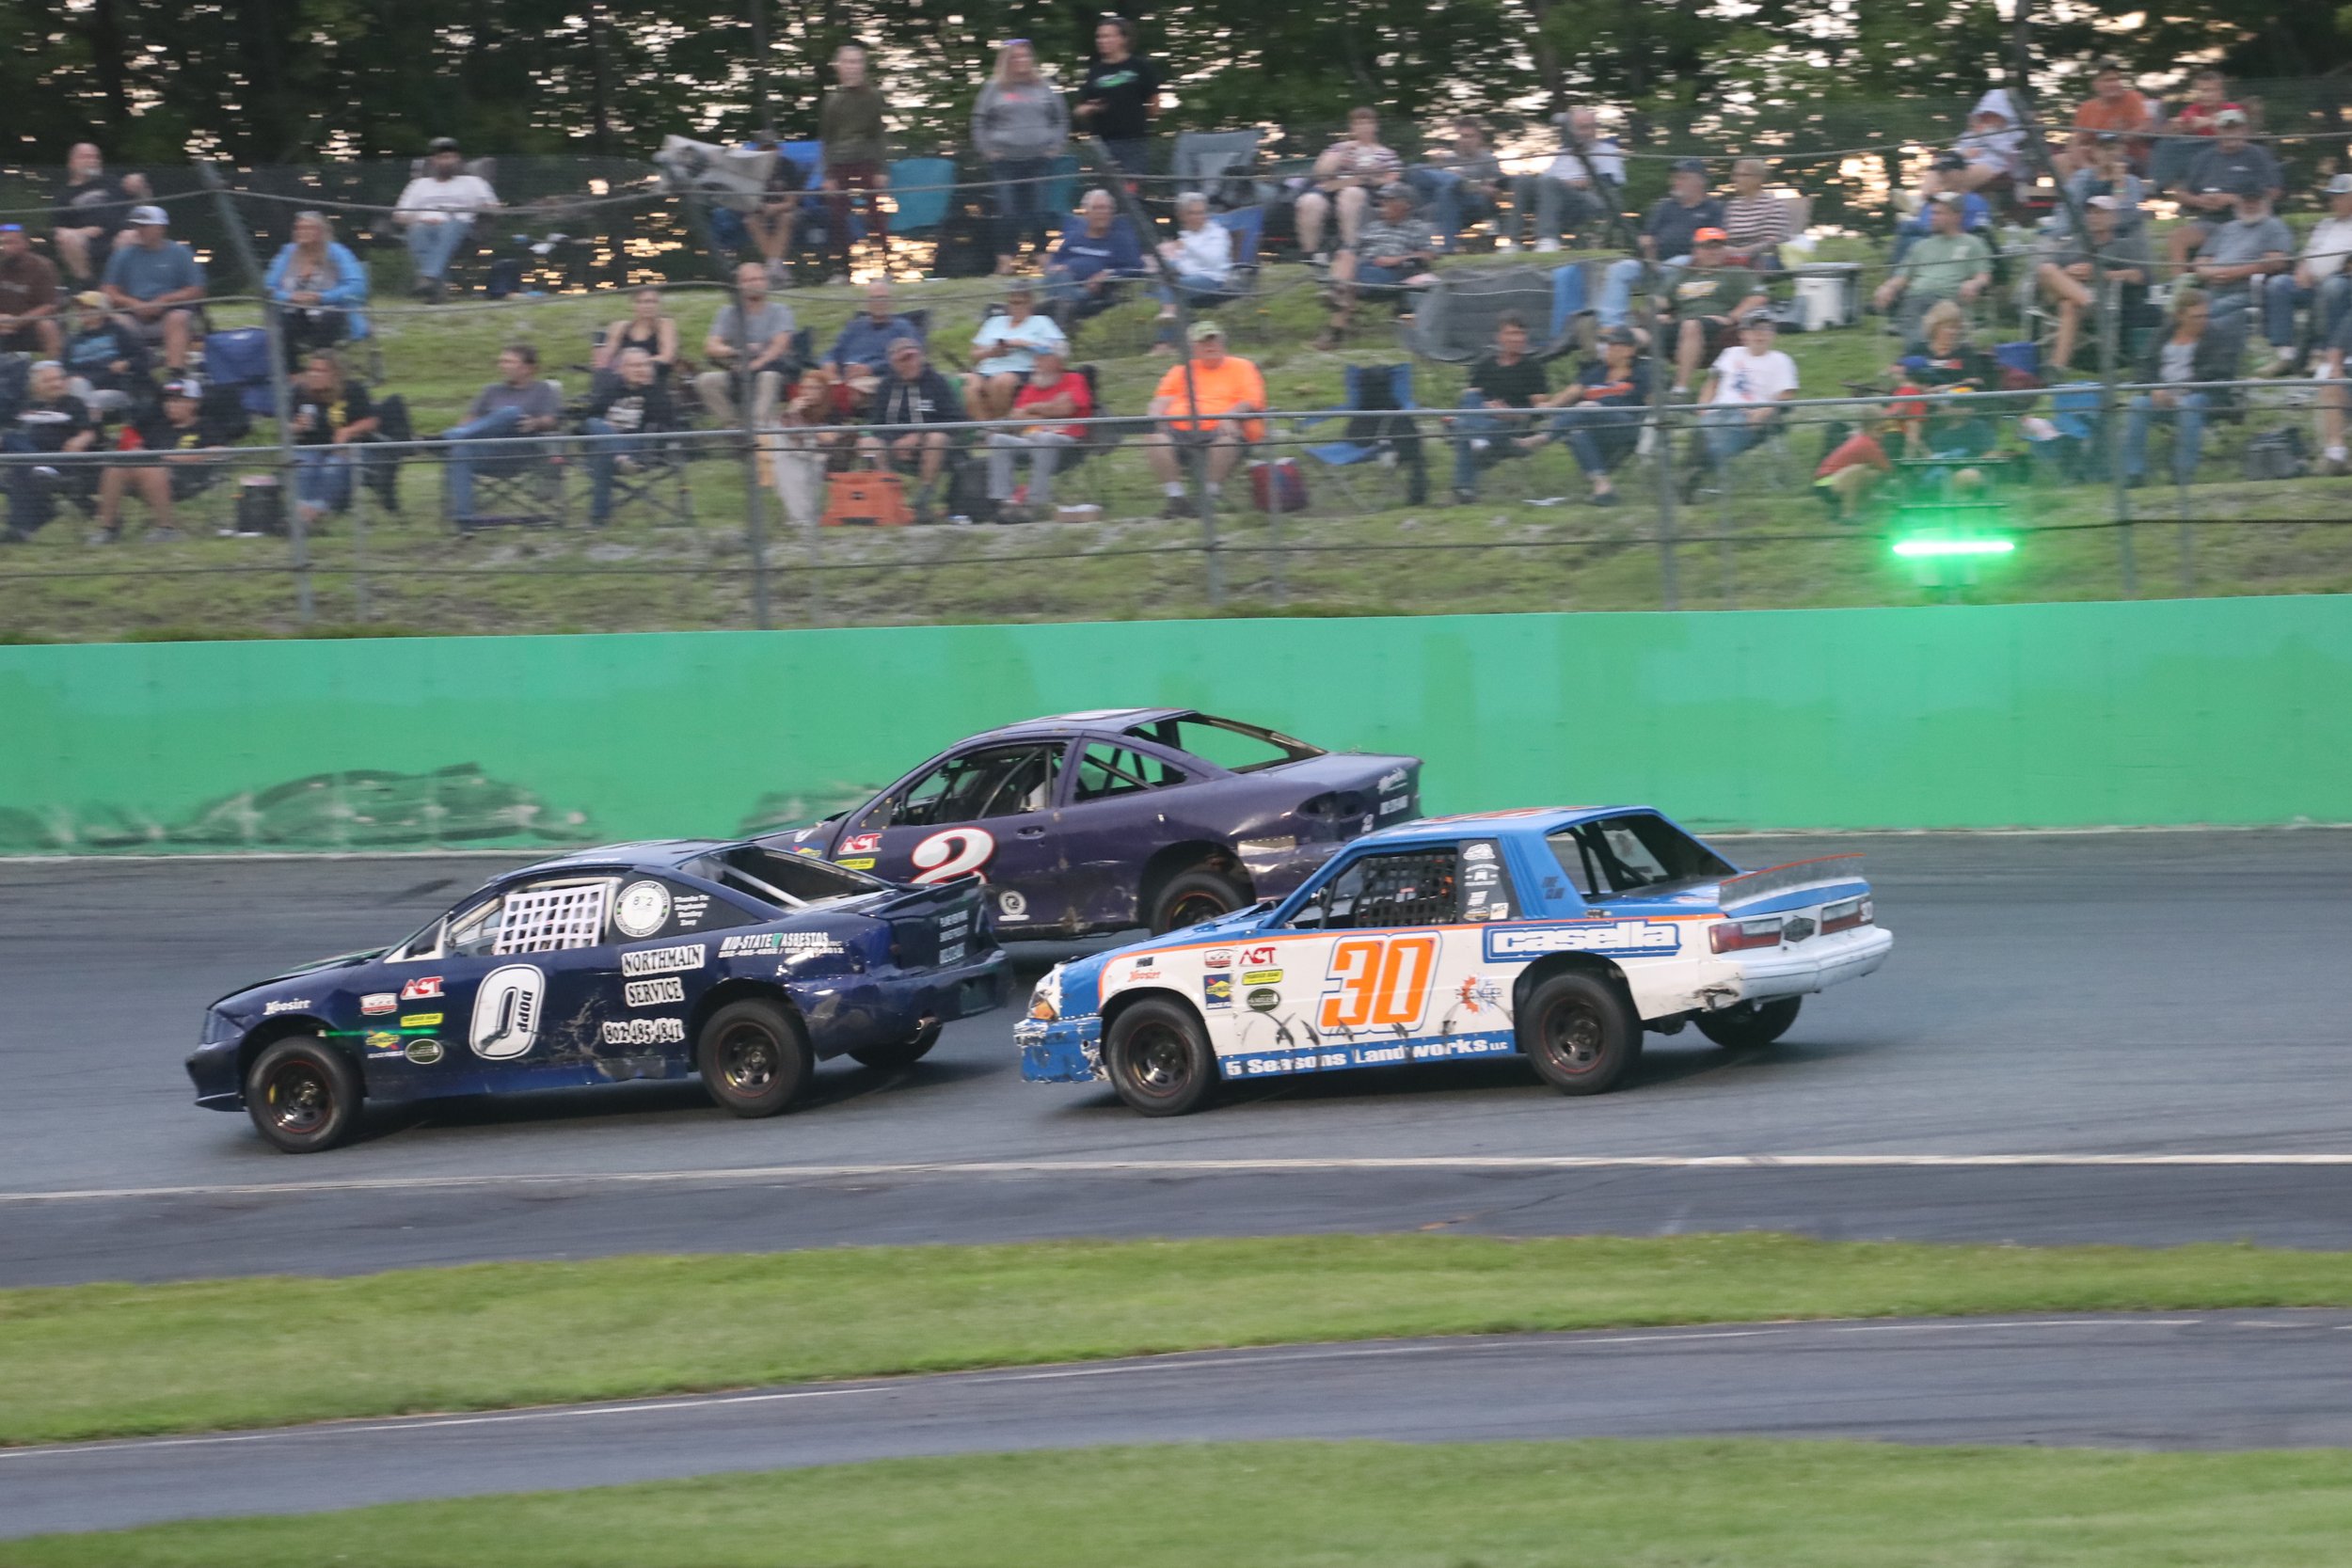 Tight Standings Lead into Prestons Kia Fireworks Spectacular on Sunday, July 30th — Thunder Road Speedbowl